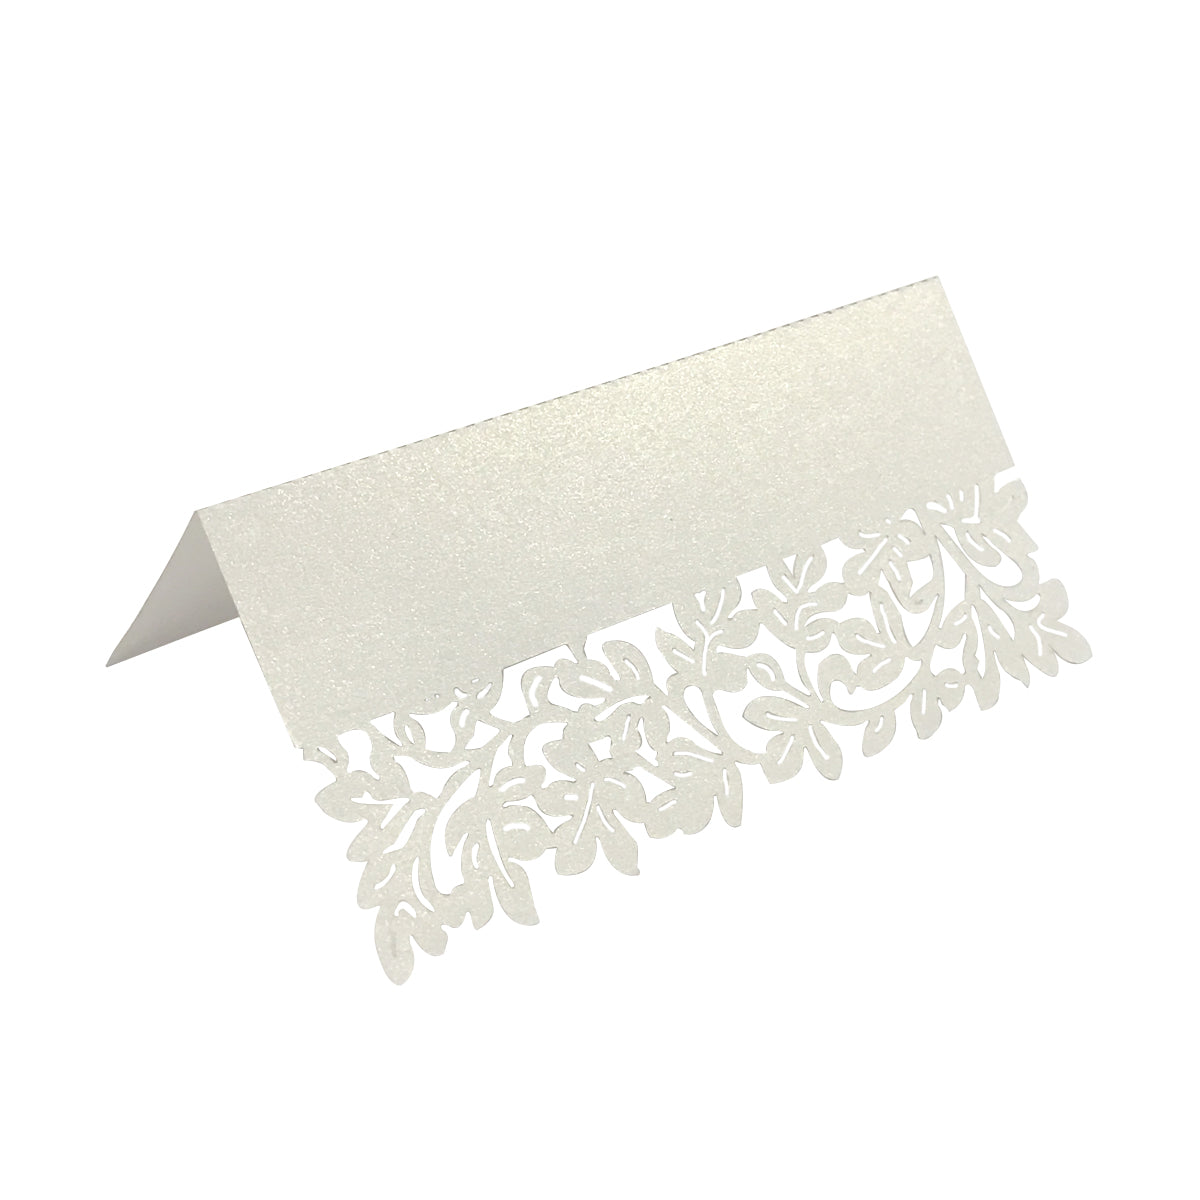 Wrapables Wrapables Vines Wedding Decor Table Name Place Cards (Set of 50)